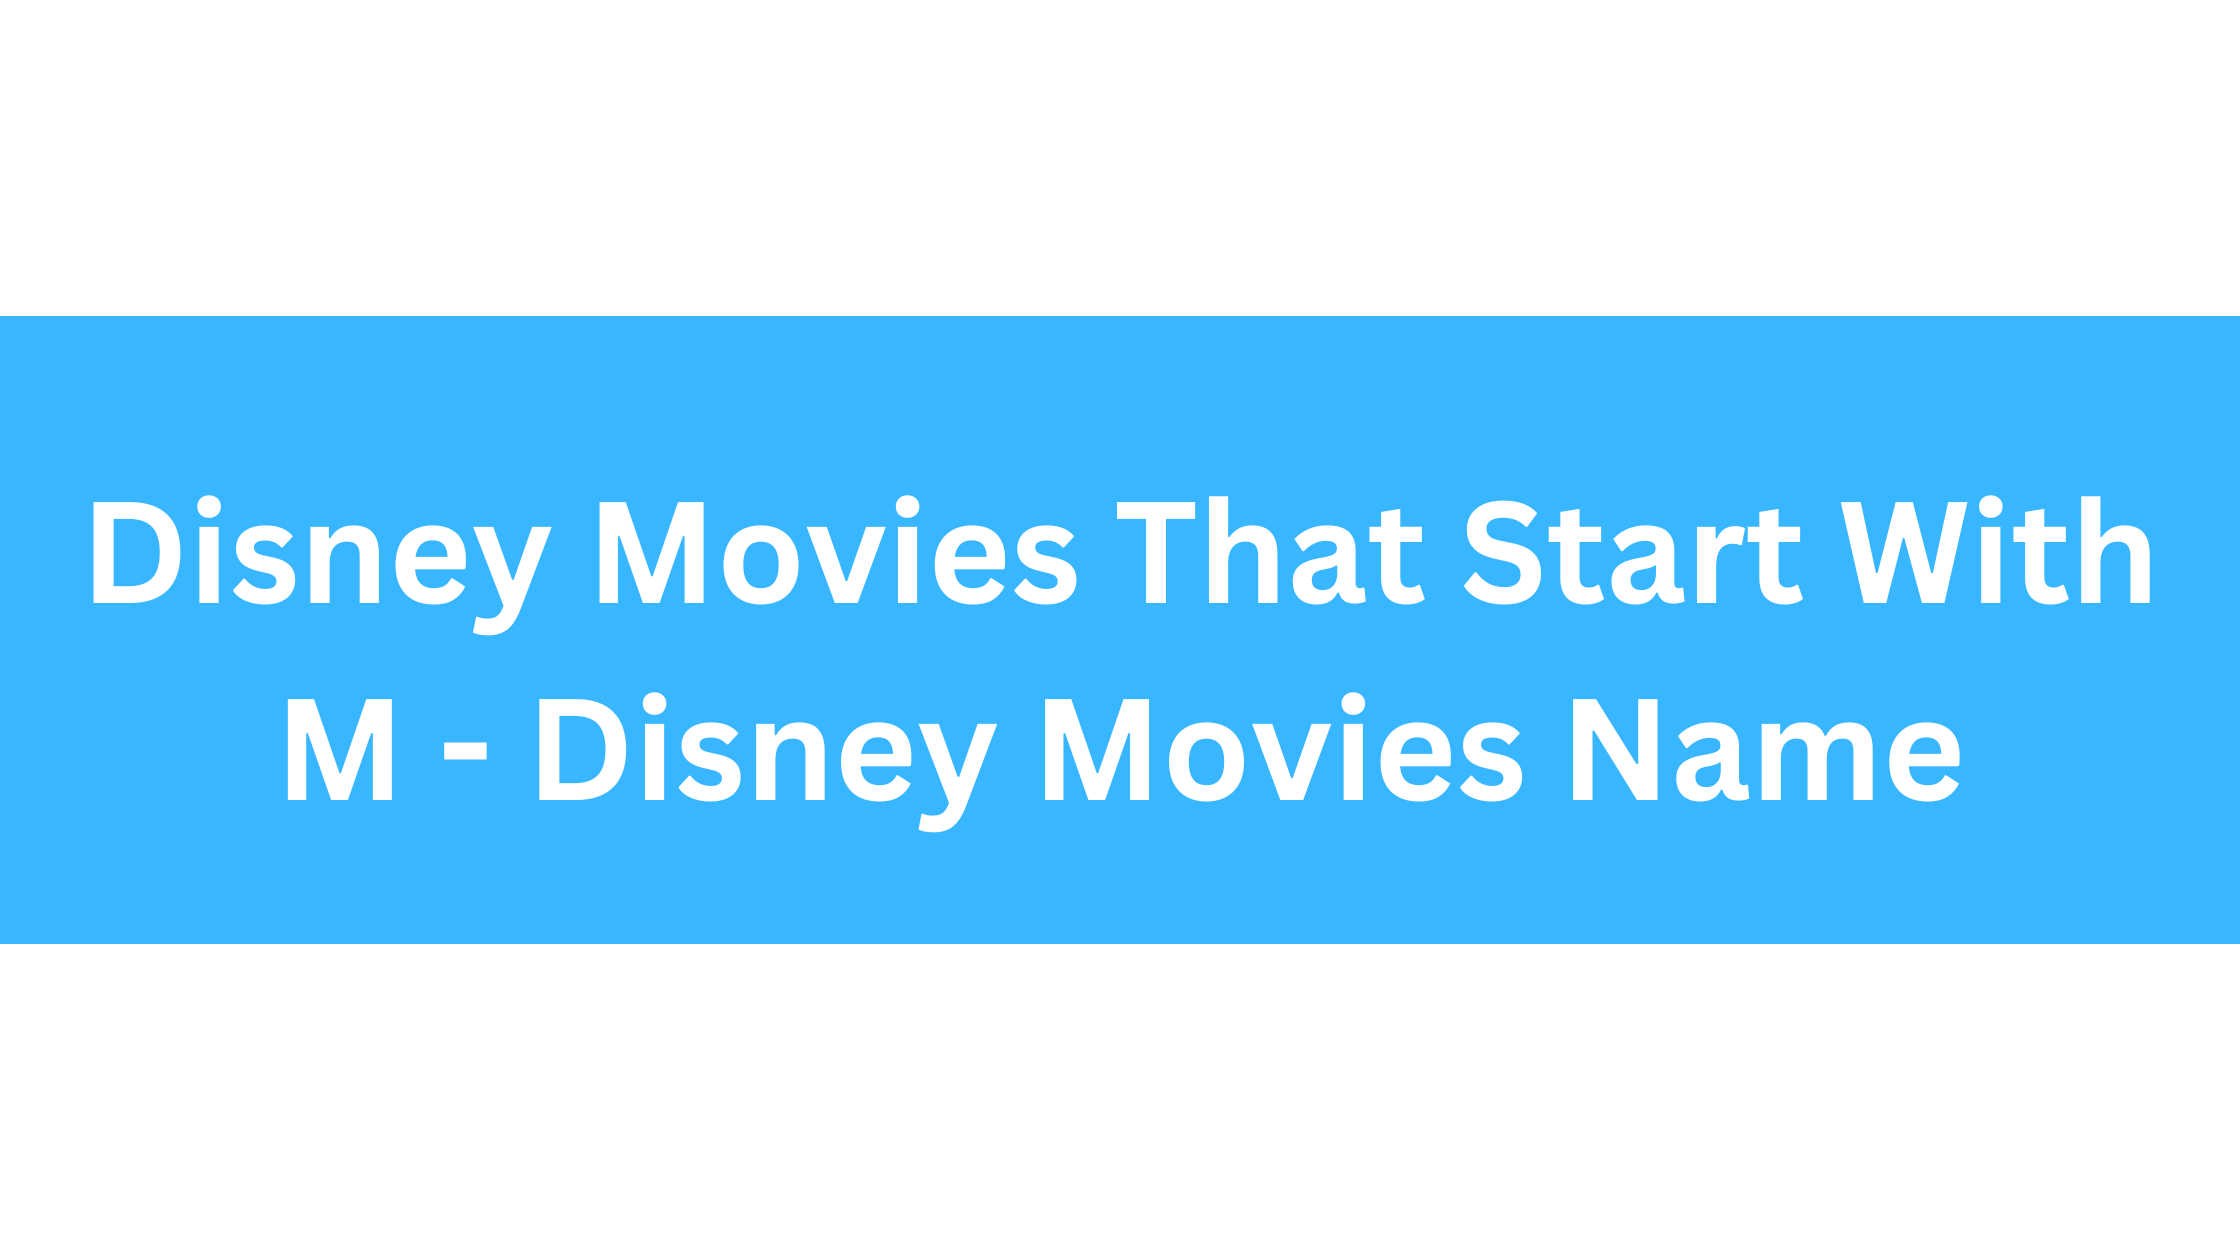 Disney Movies That Start With M